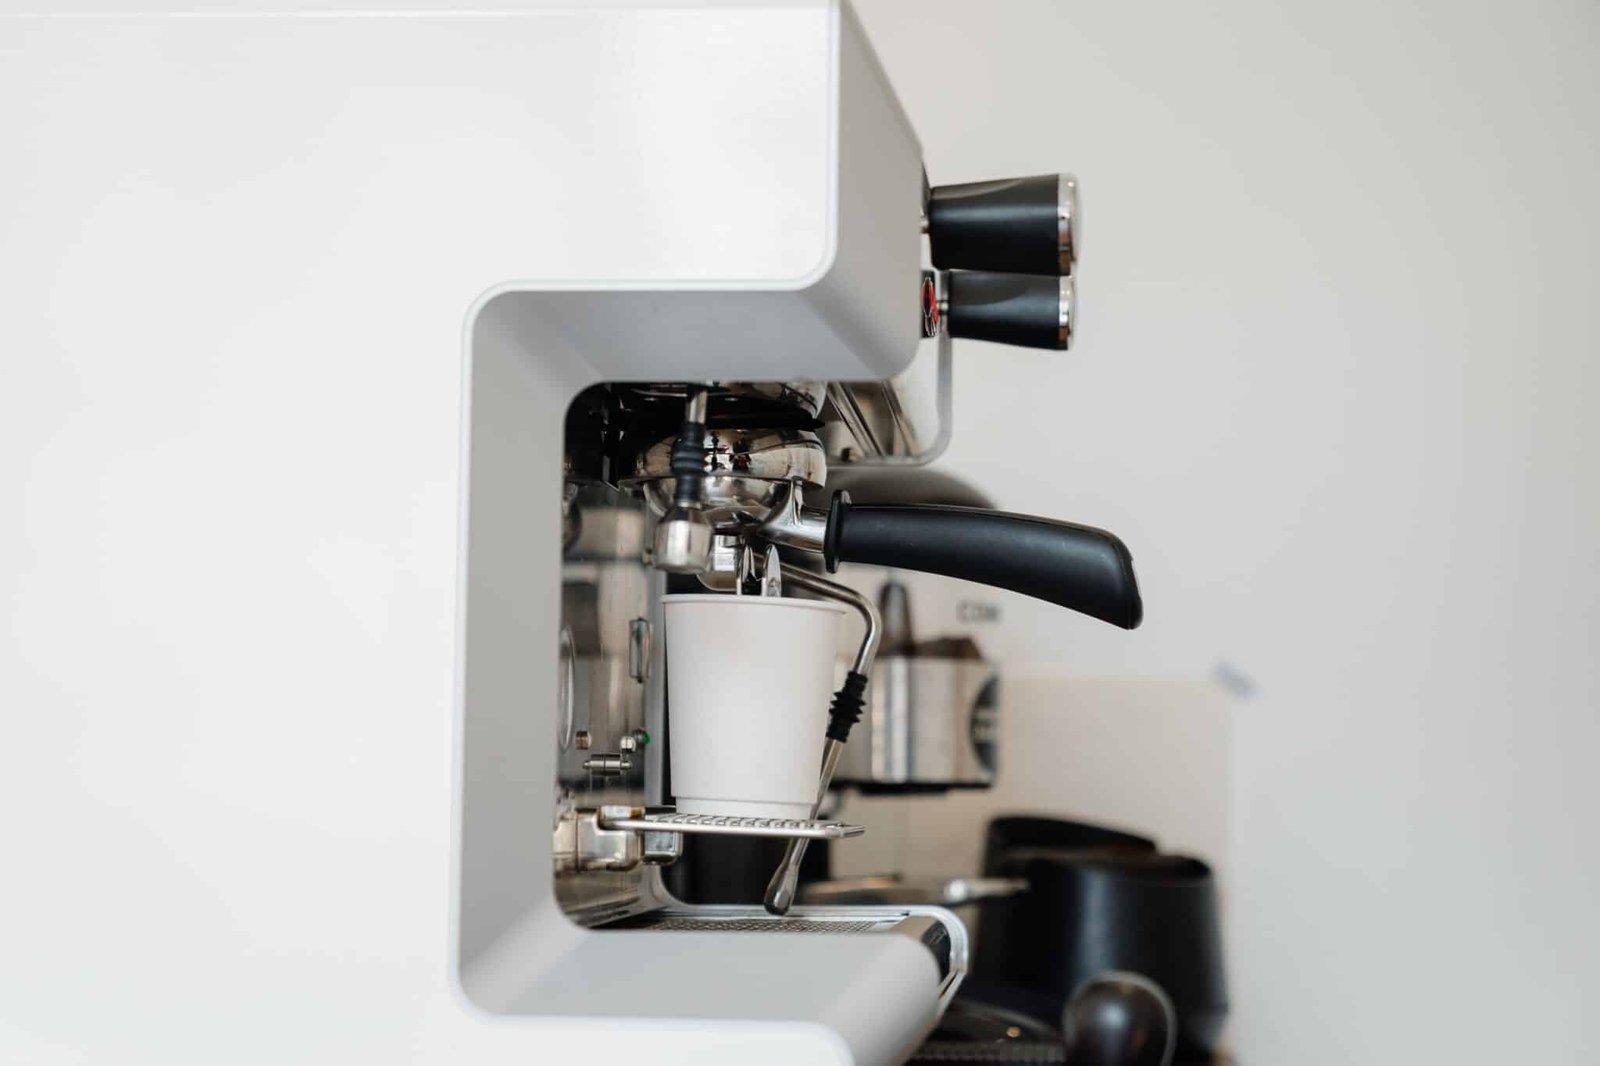 A white commercial coffee maker brewing coffee